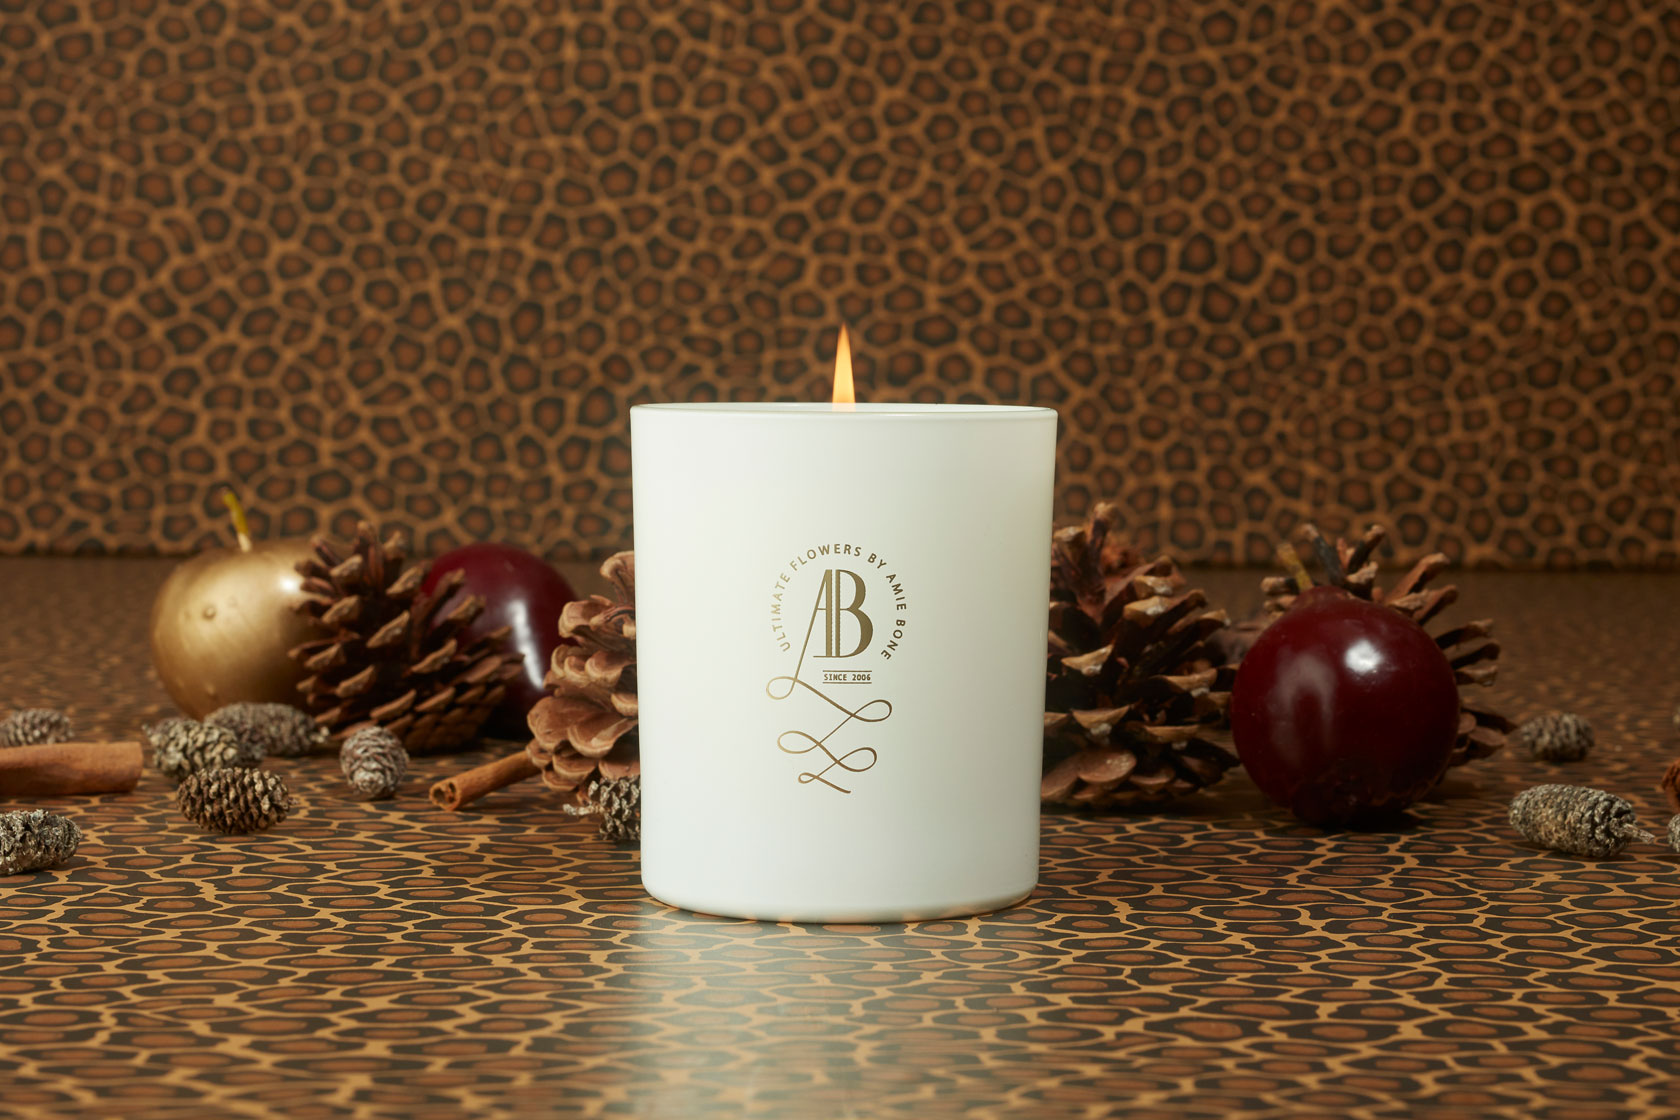 a white candle with an iconic gold crested logo sitting next to a white gift box tied in black ribbon